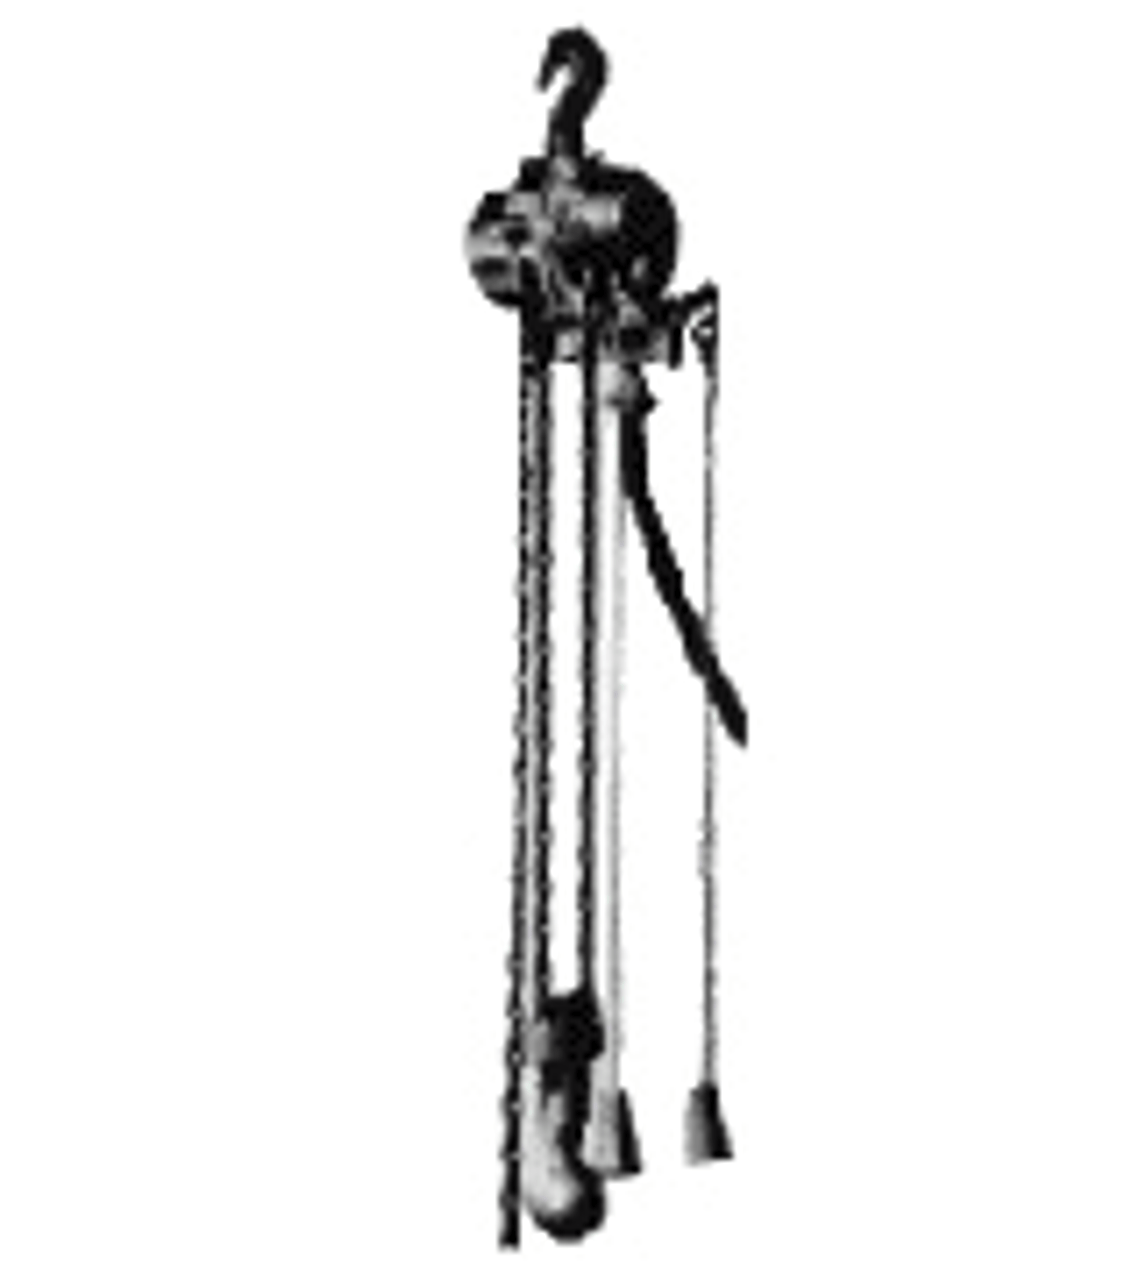 IMPA 591355 Chain hoist pneumatic - 2 ton - 3,0 mtr./min with full load TCR2000C2 with 3 mtr. chain (lift)-ATEX zone 2 & 22